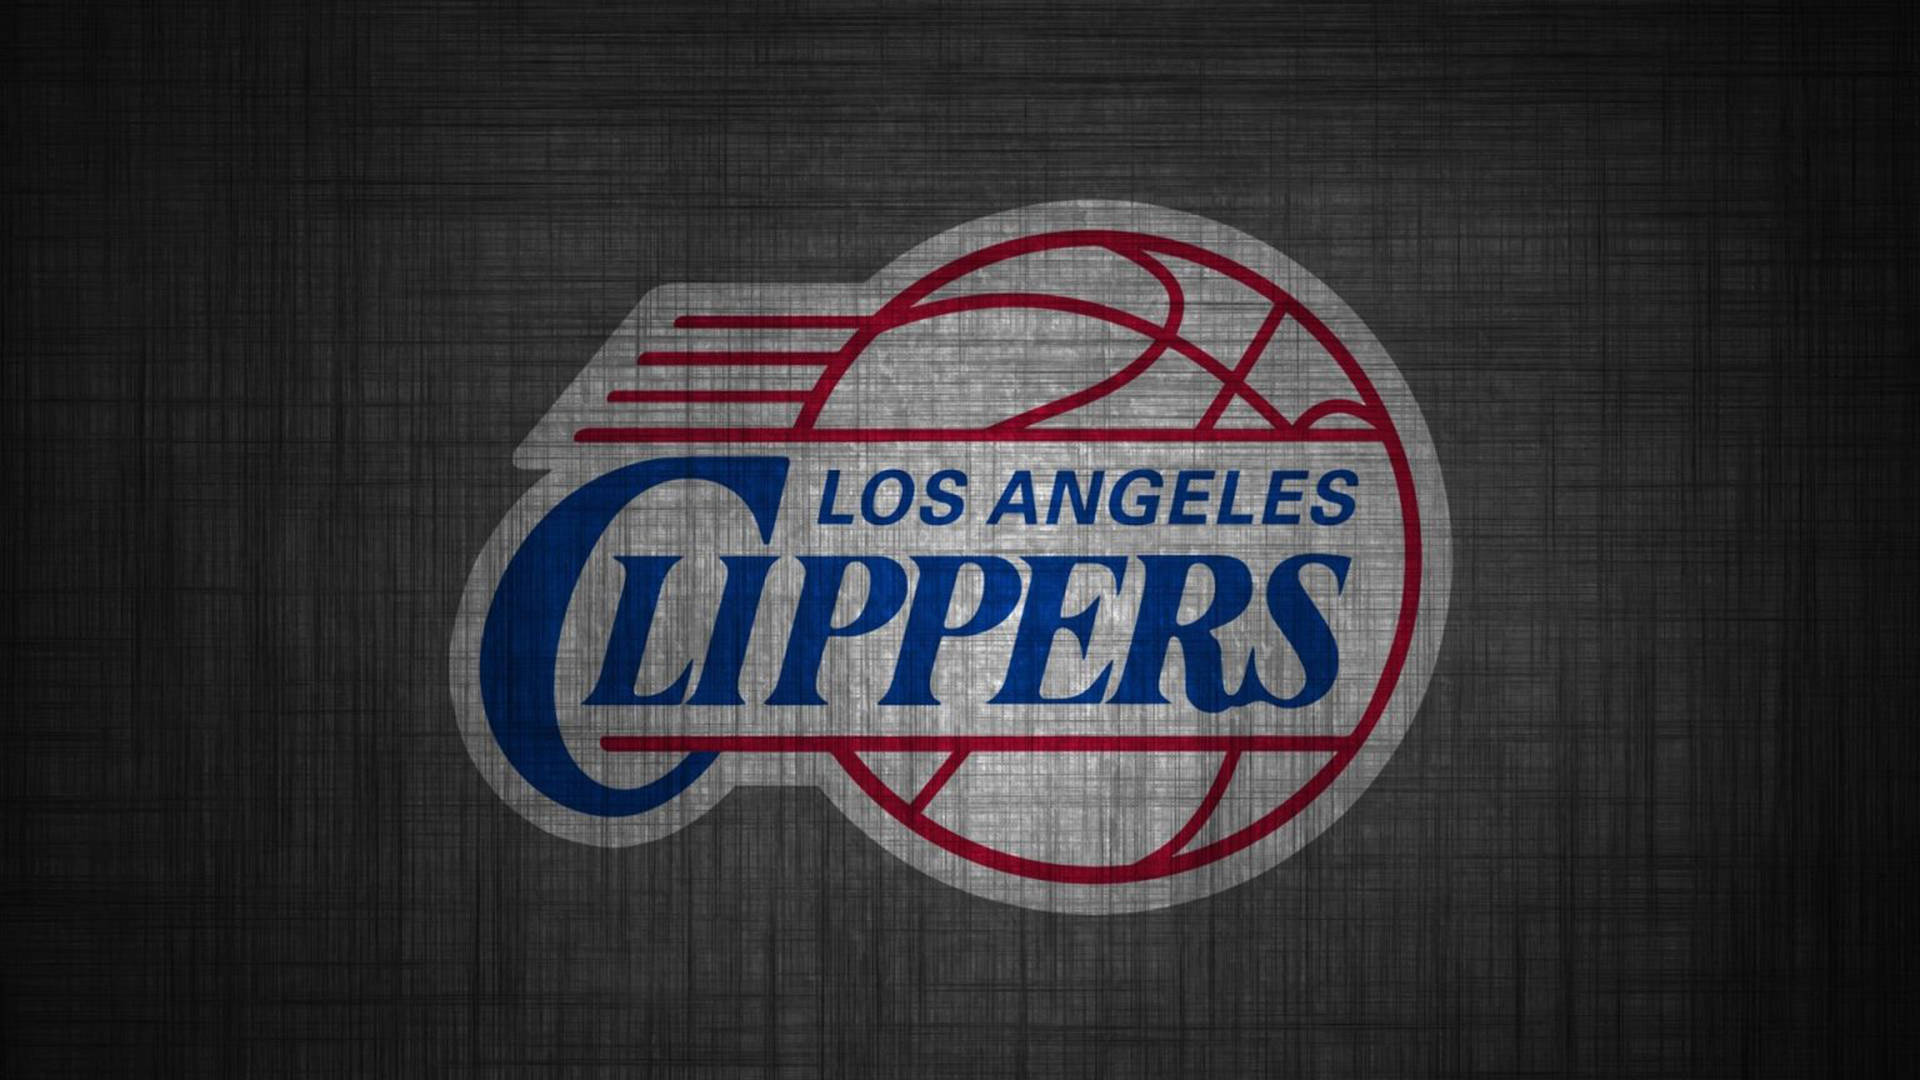 Los Angeles Clippers Sketch Art Background